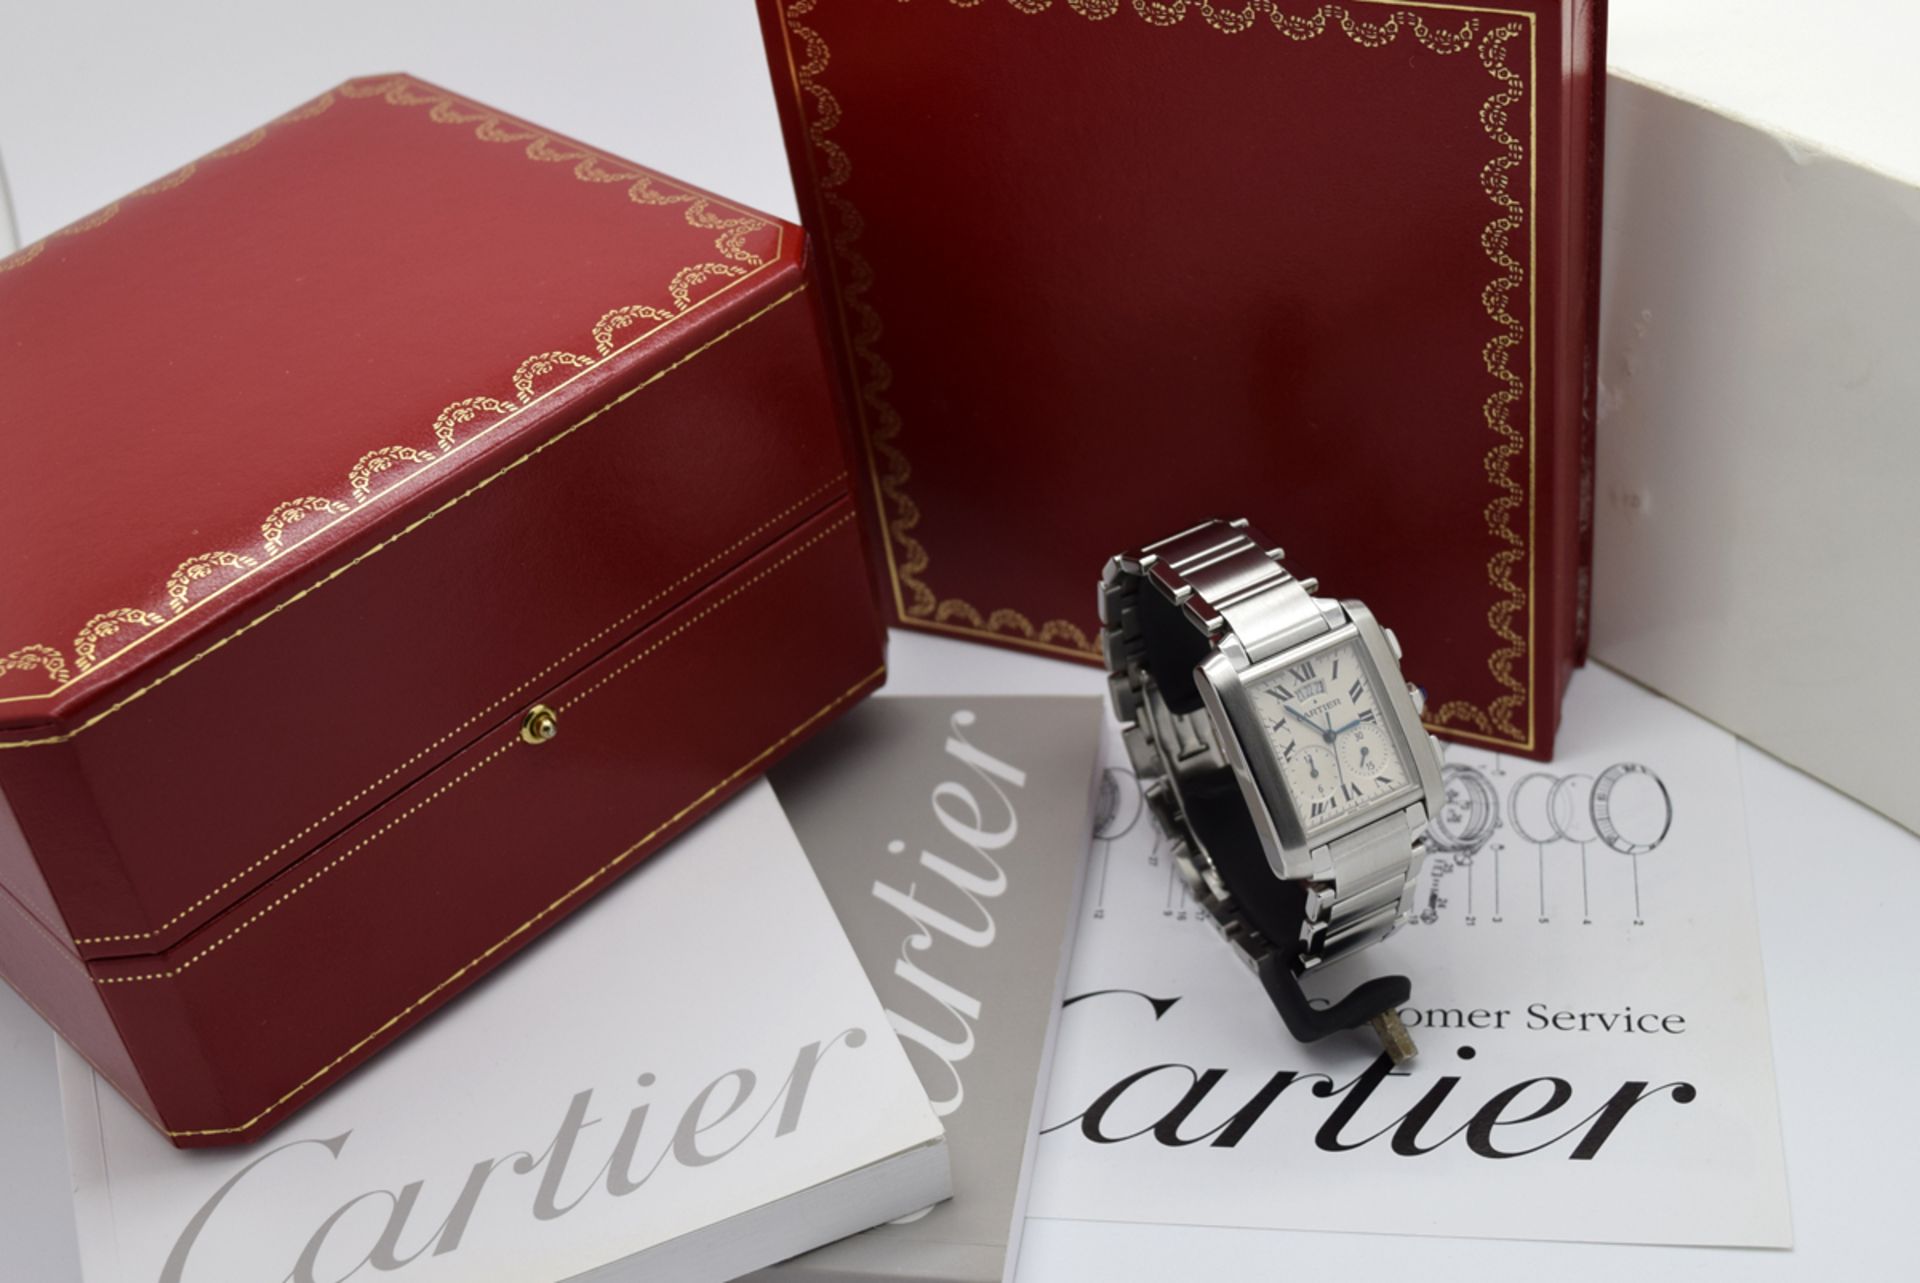 MENS CARTIER TANK CHRONOGRAPH - STAINLESS STEEL (2653 - W51024Q3) - Image 3 of 12